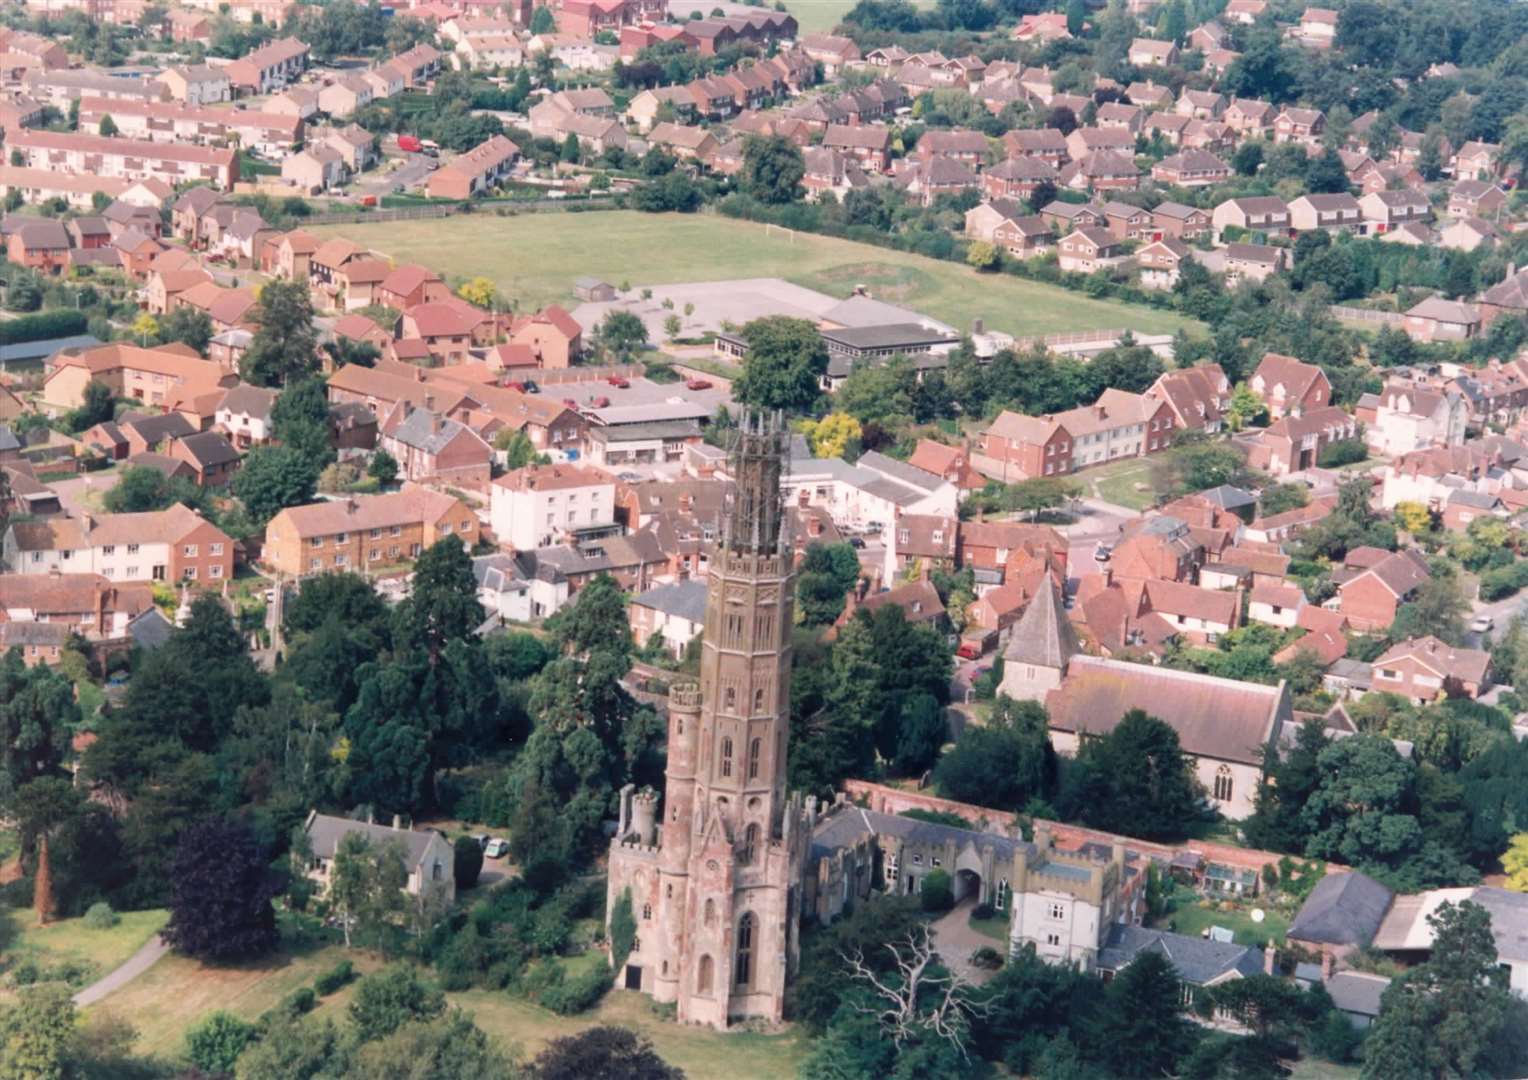 The village of Hadlow and its distinctive tower in 1993